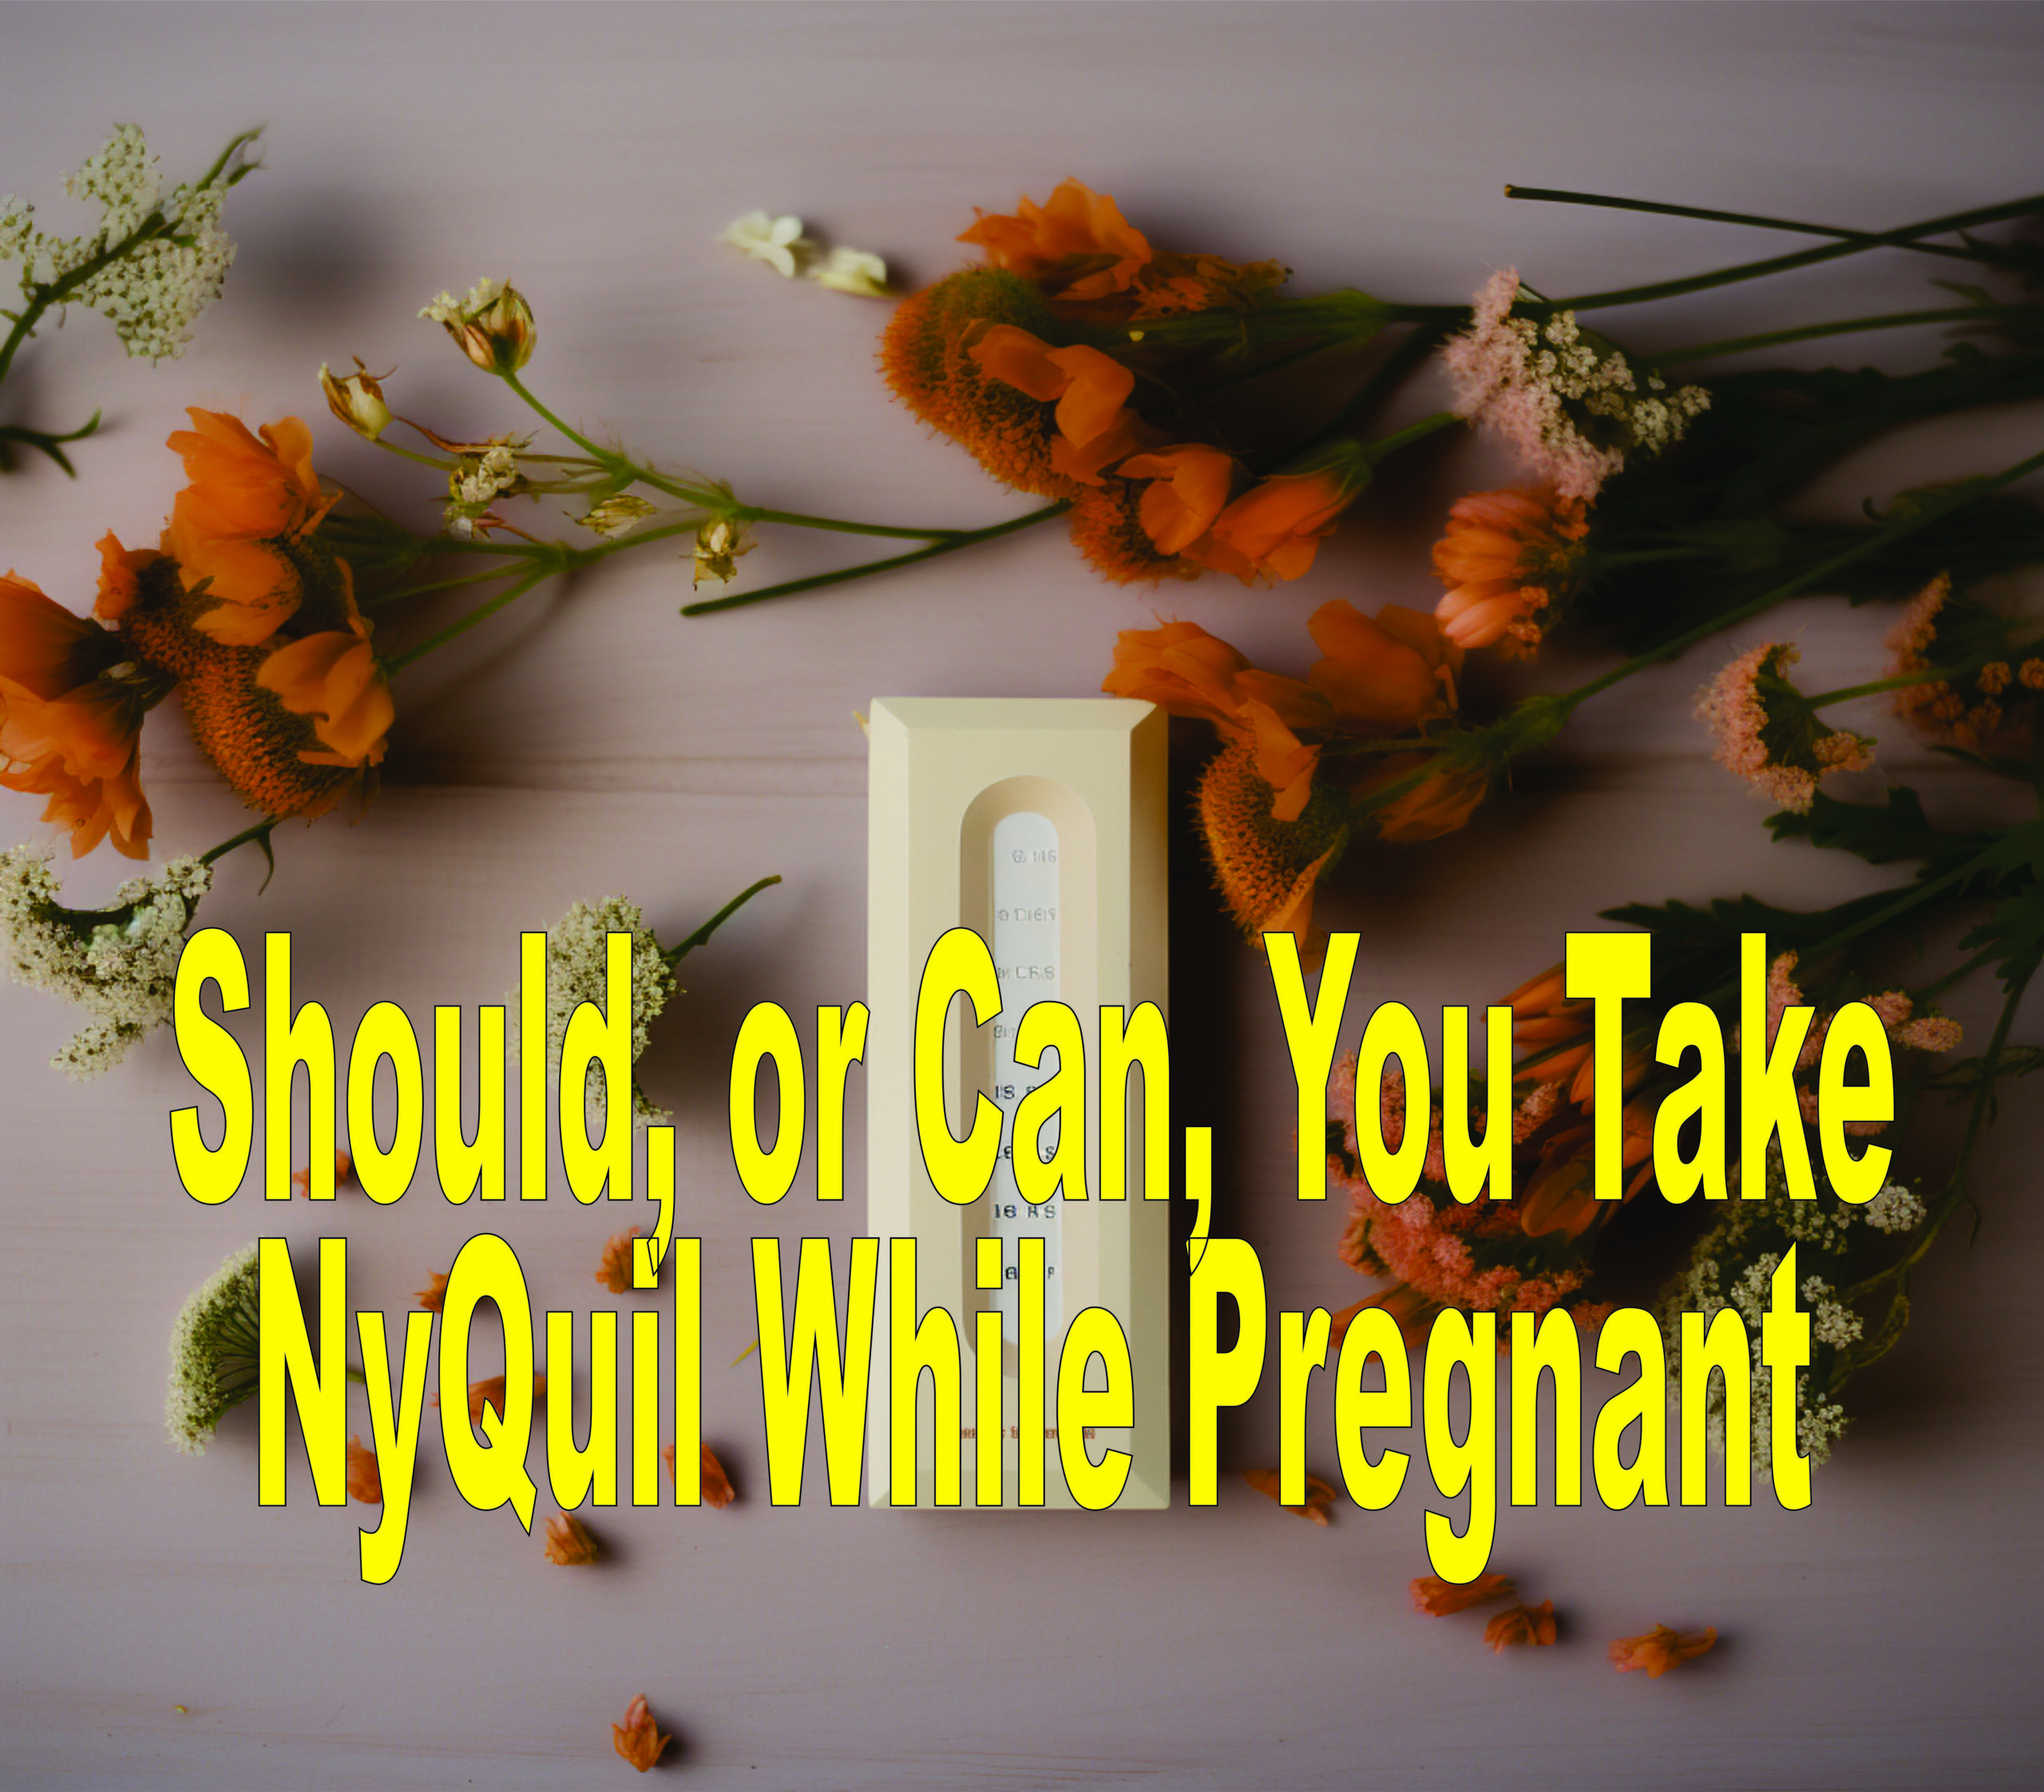 Should, Or Can, You Take Nyquil While Pregnant